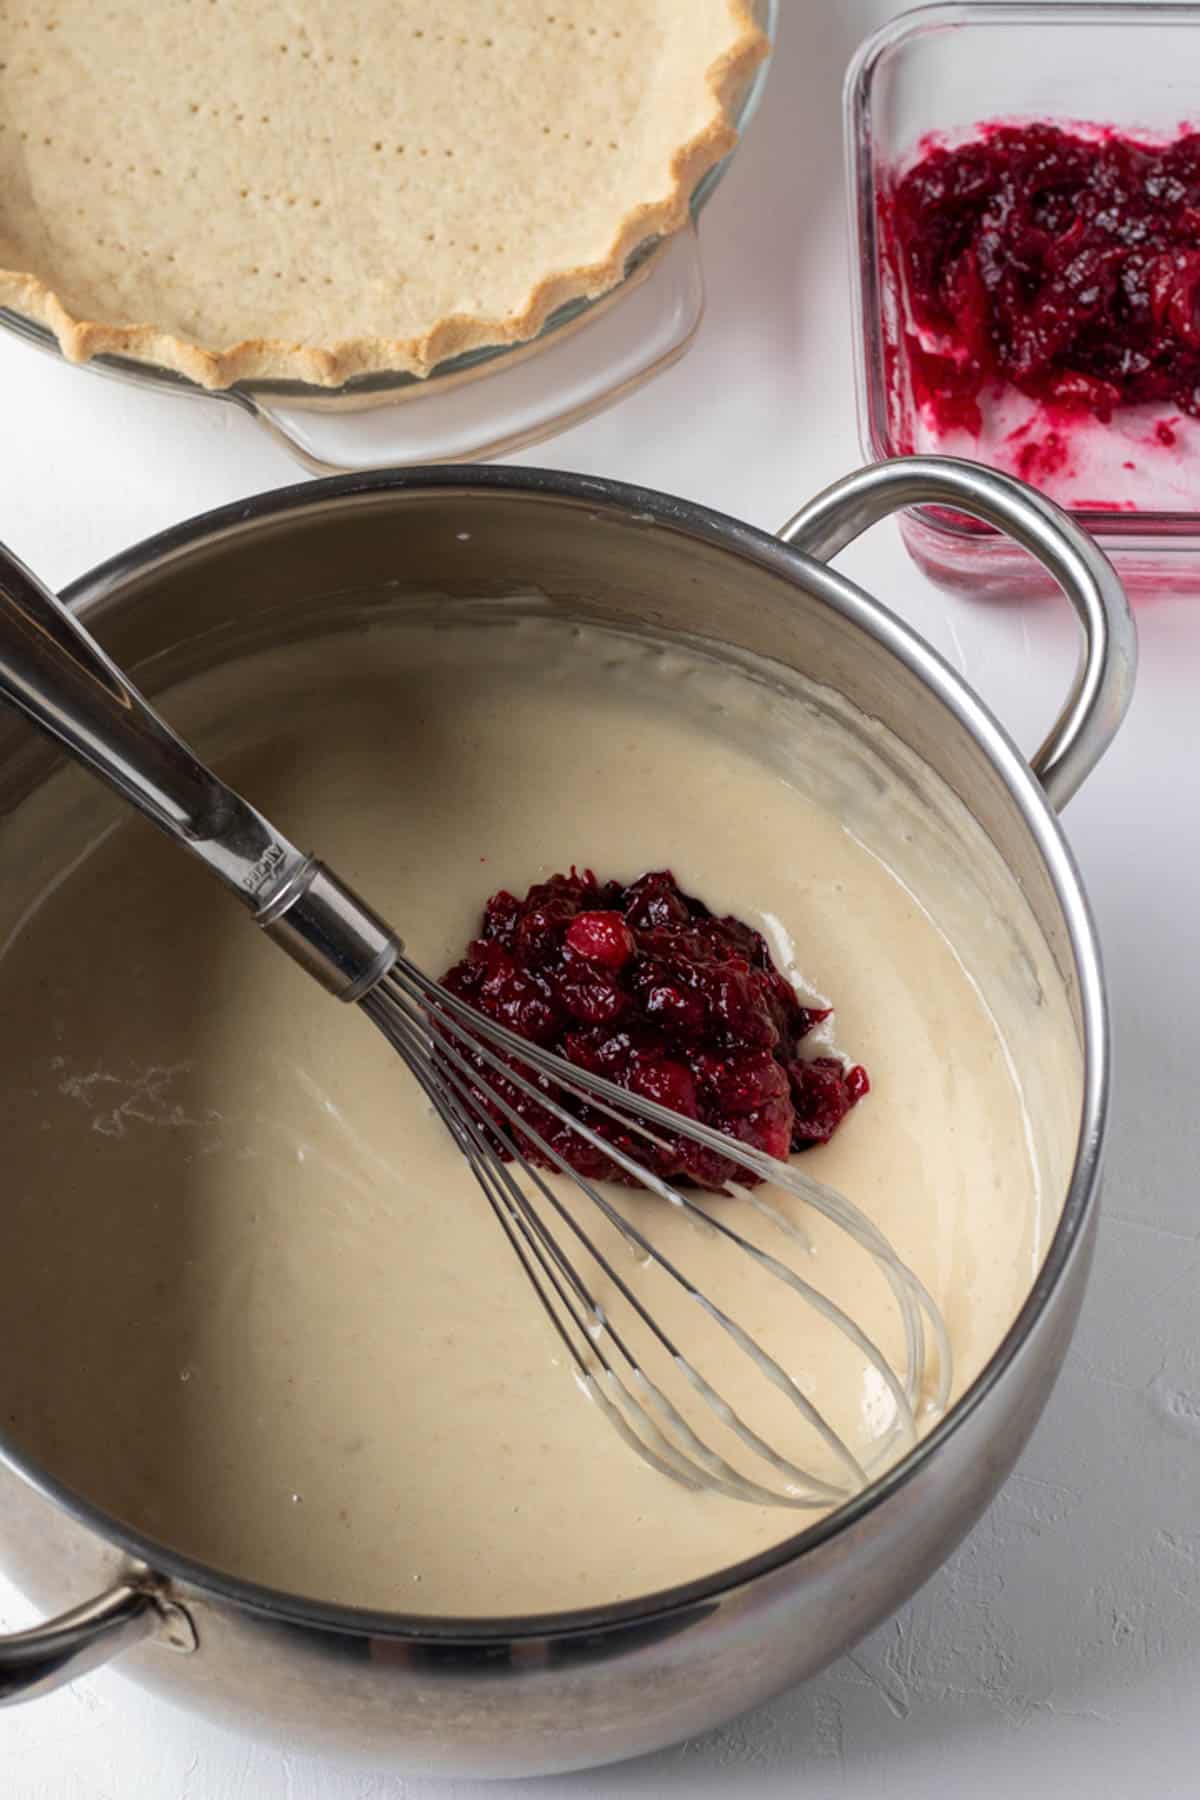 whisking cranberry sauce into the pudding filling.